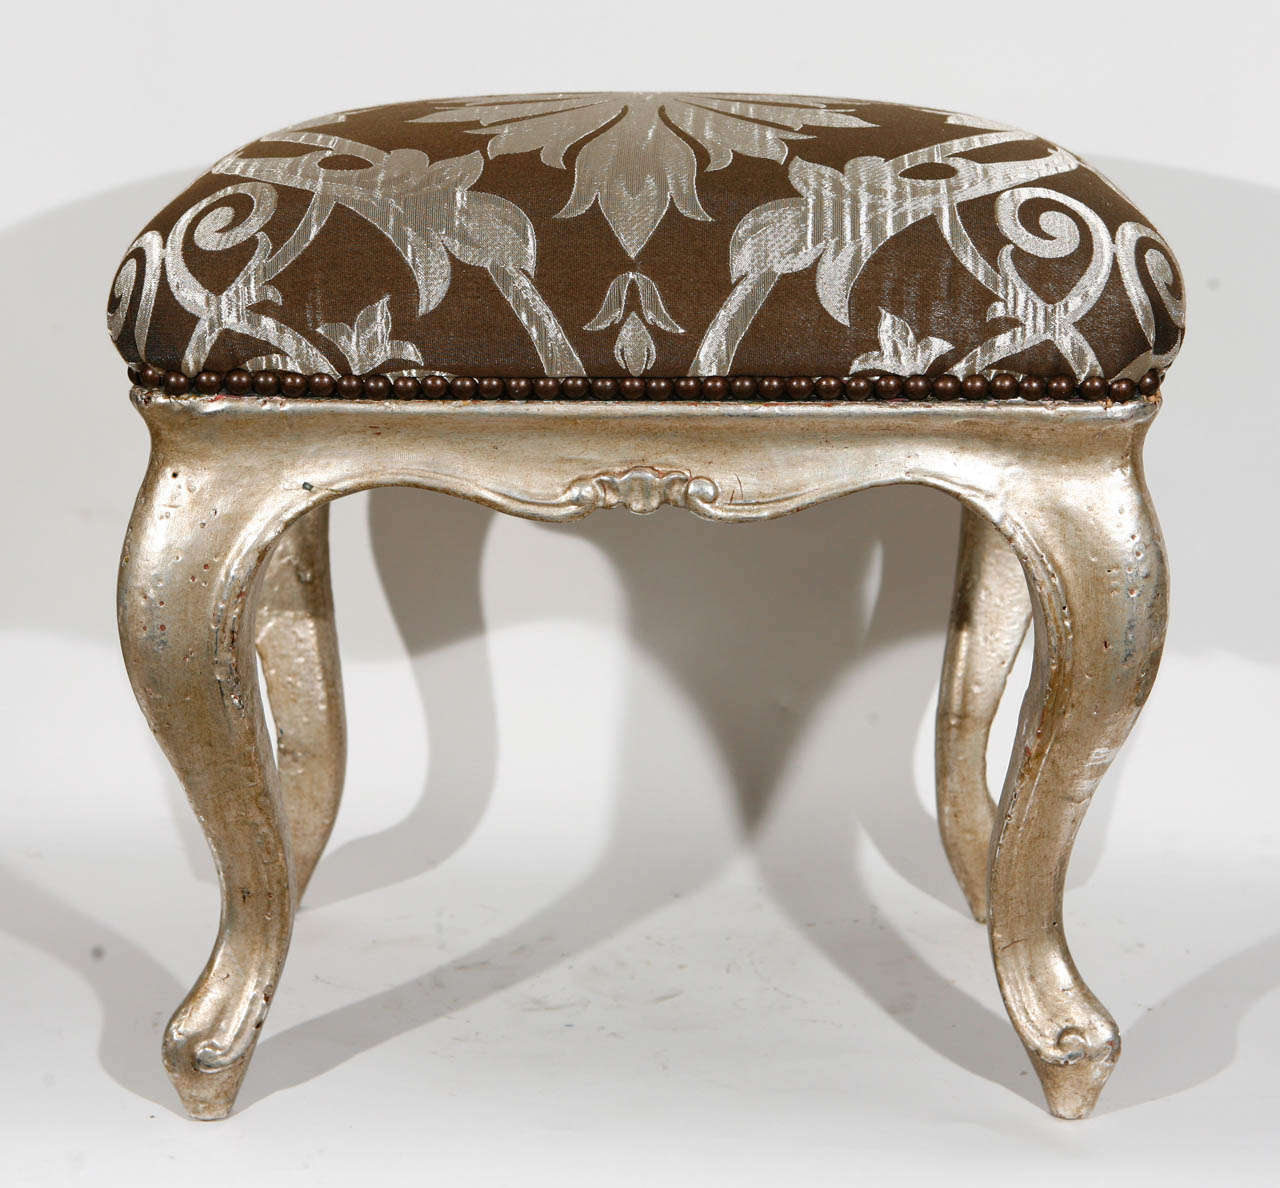 Pair of 18th century Venetian carved wood stools with silver leaf.  The silver leaf is not original.